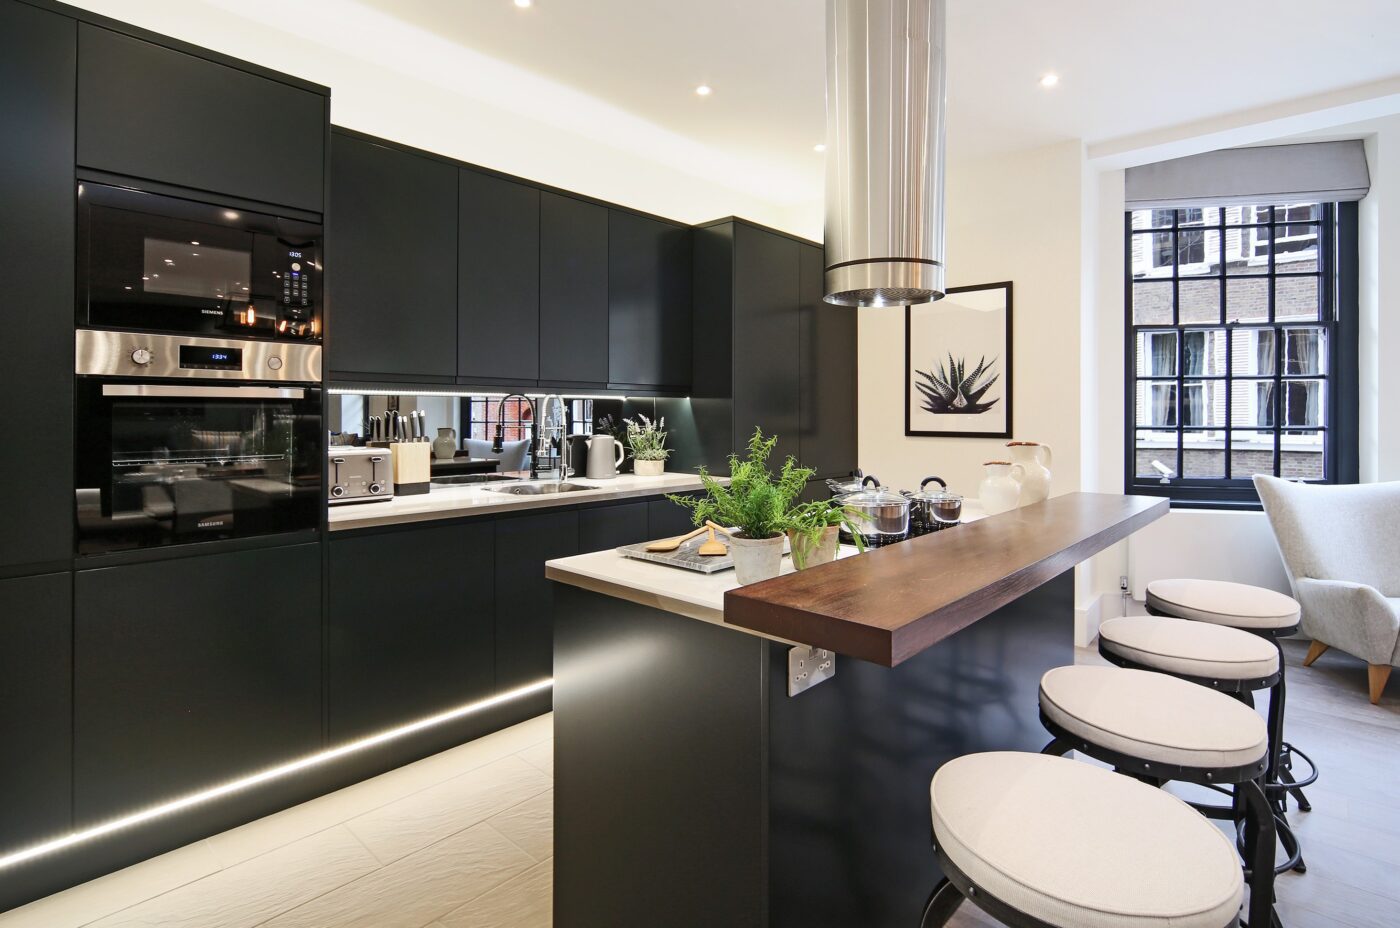 An investment property in London with a black kitchen with kitchen island feature, hard wood floors and built in lights.